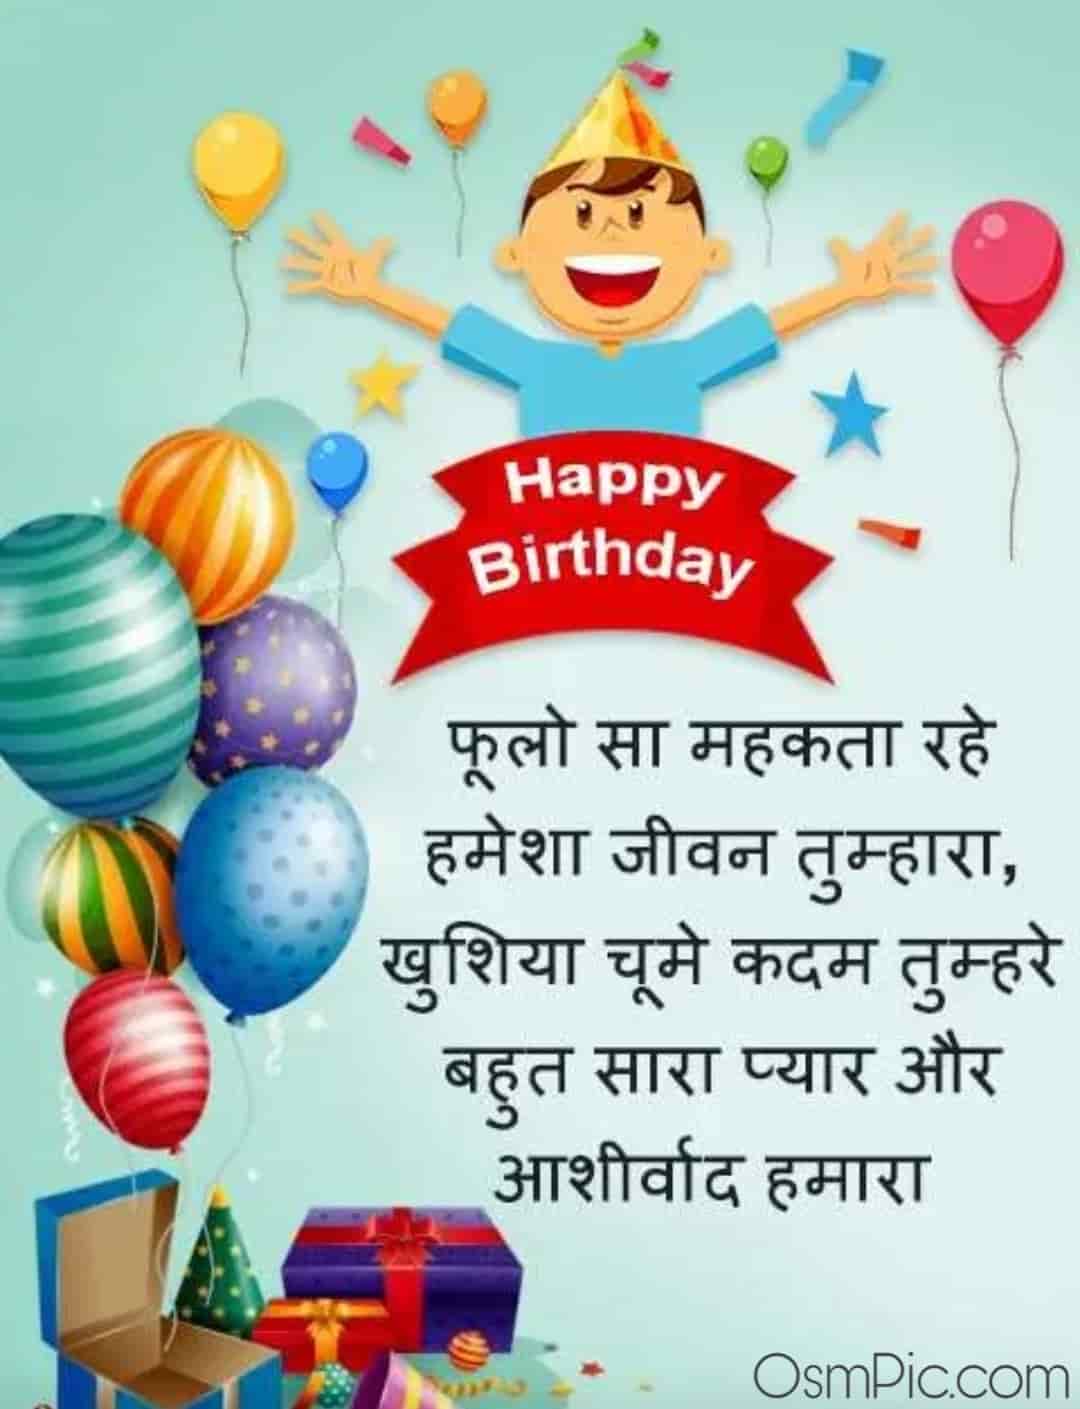 Best Happy Birthday Wishes In Hindi Images For Friends